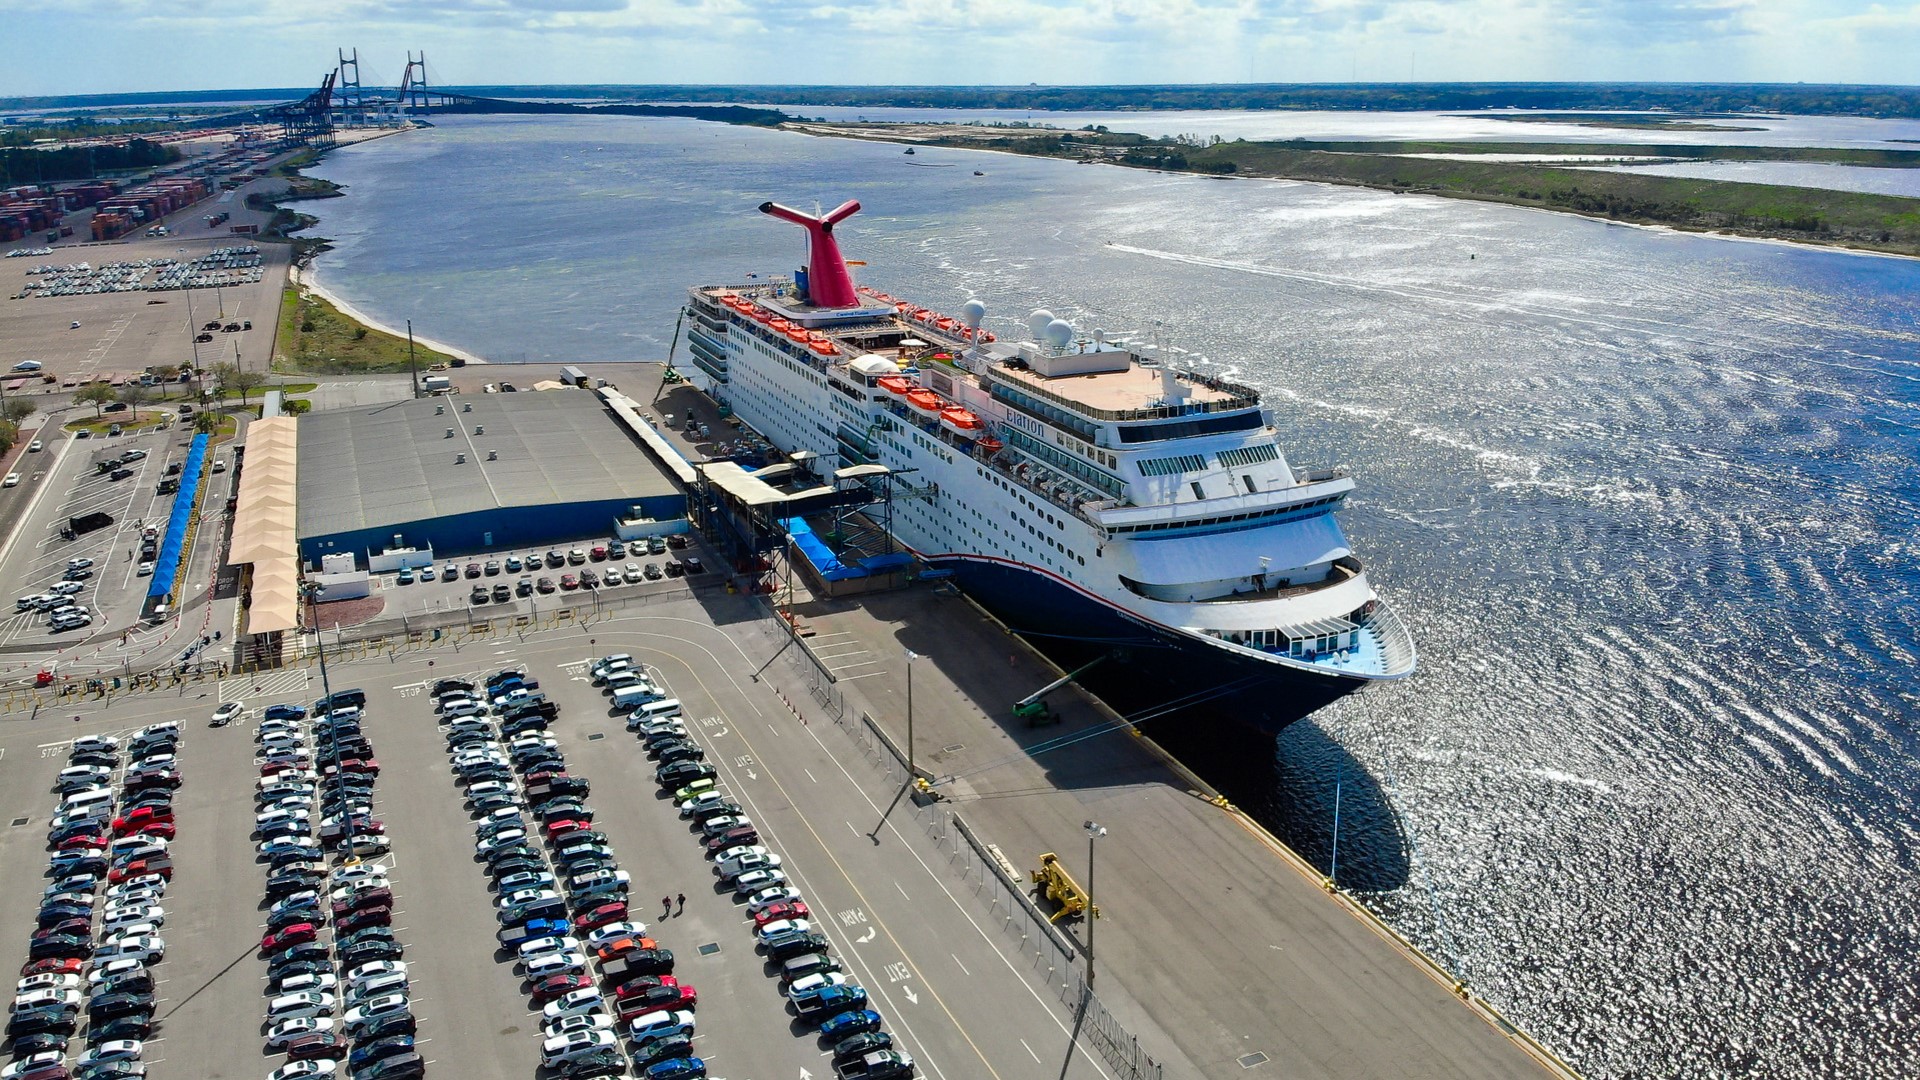 More than 3 million passengers have sailed from Jacksonville throughout the 20 years Carnival has been at JAXPORT.